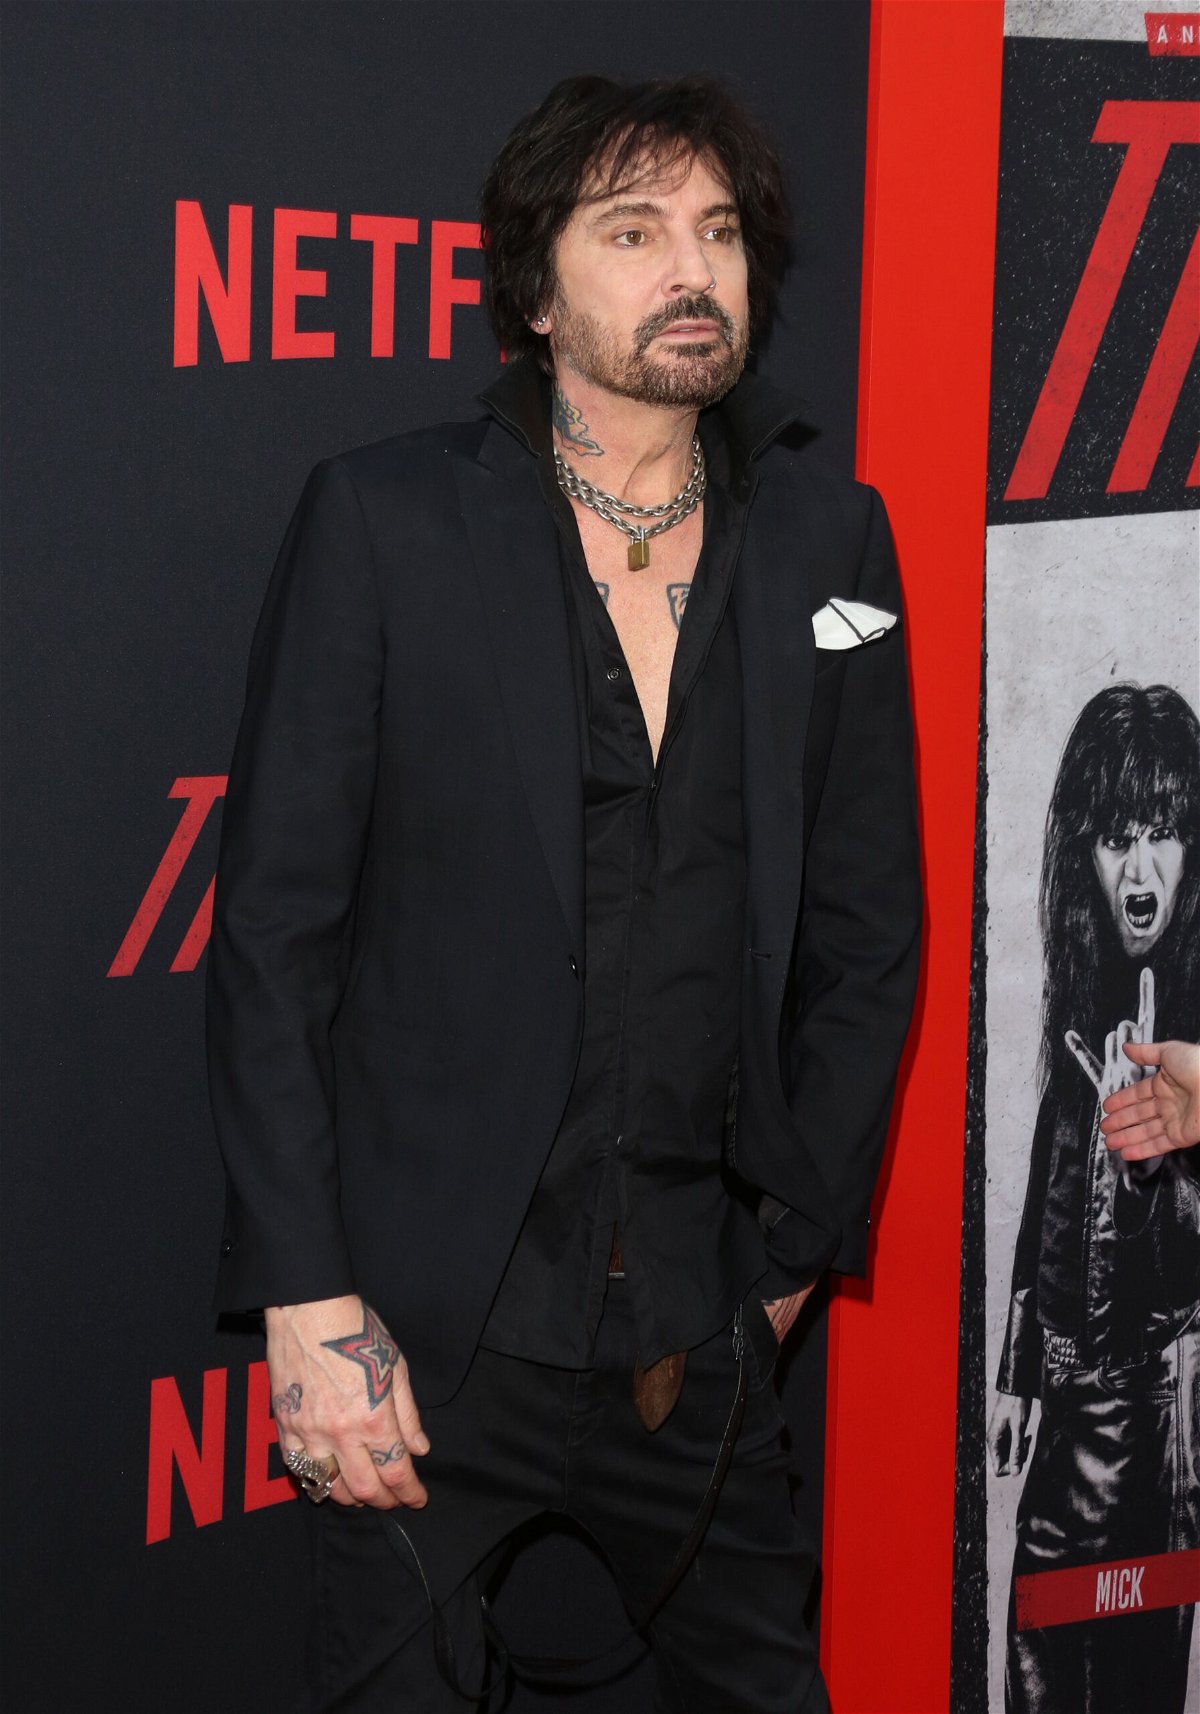 <i>Paul Archuleta/FilmMagic/Getty Images</i><br/>Drummer Tommy Lee is the latest celebrity to have his photo removed from Instagram and Facebook.